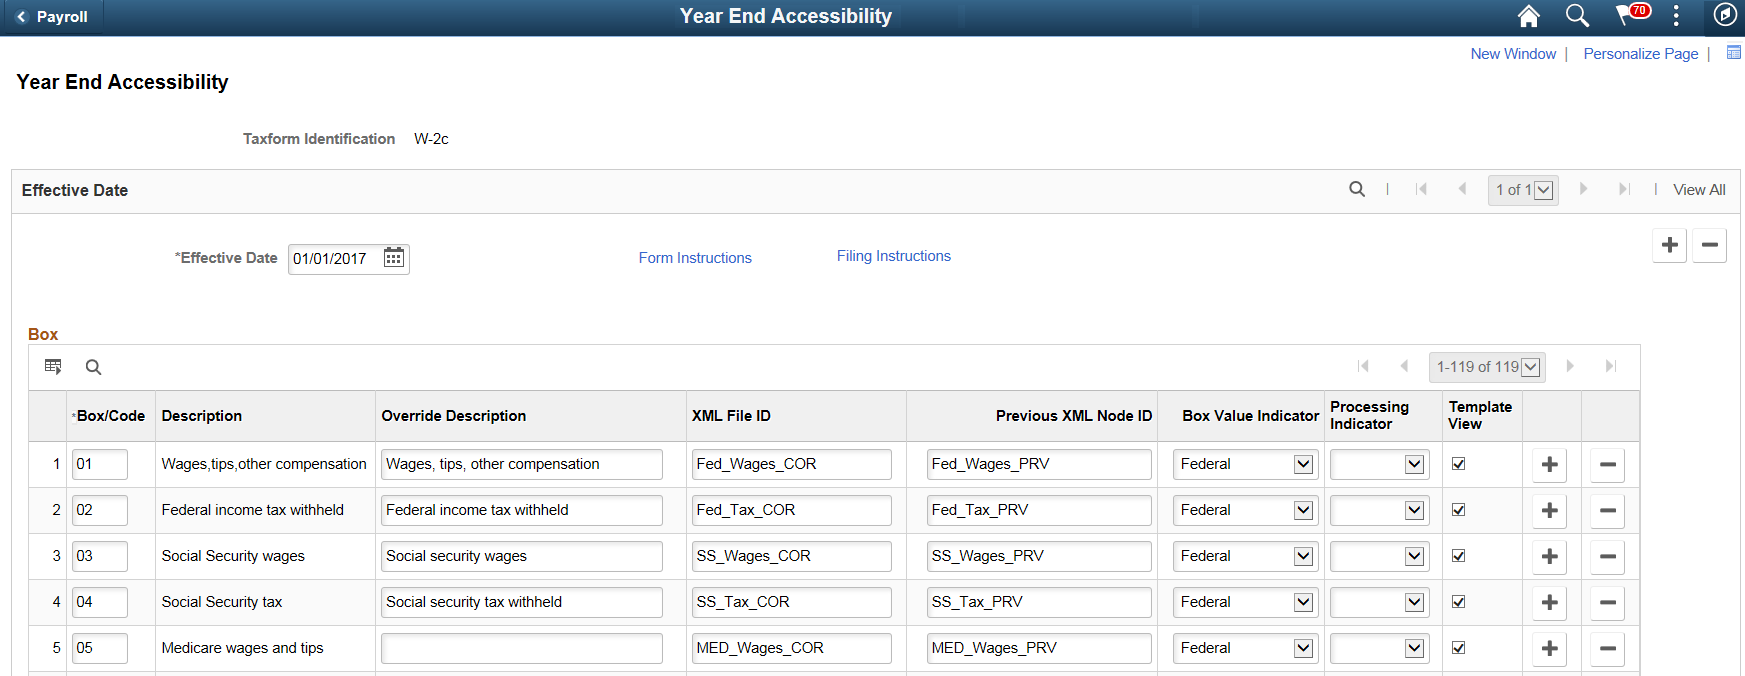 Year End Accessibility for Self Service Users